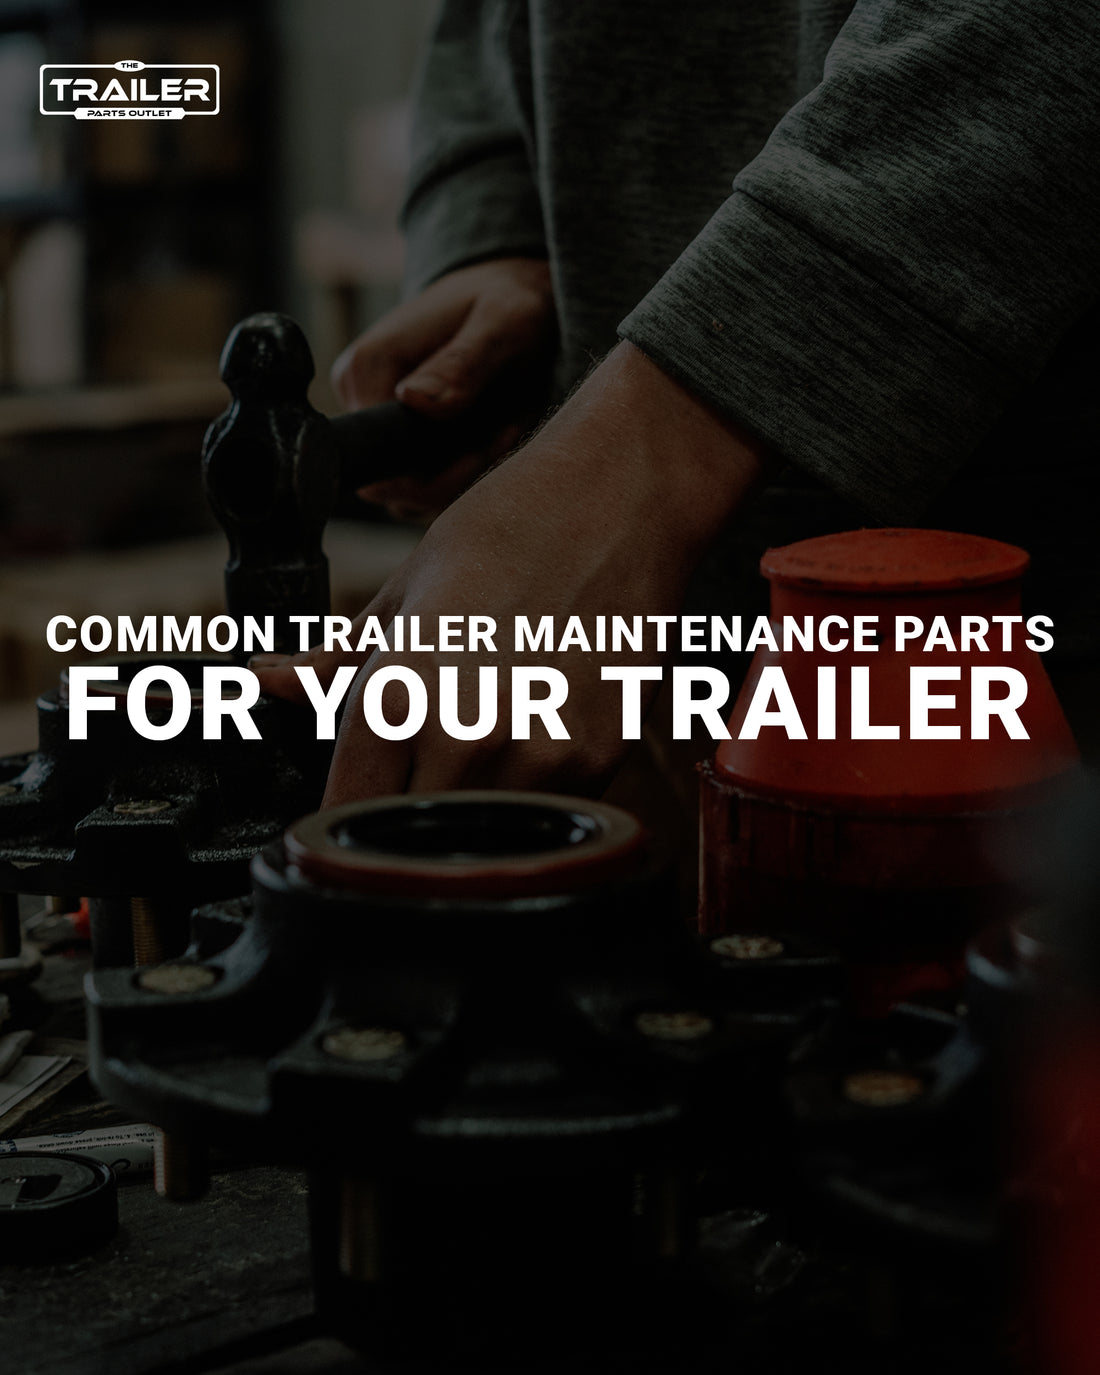 Common Maintenance Parts for Trailers